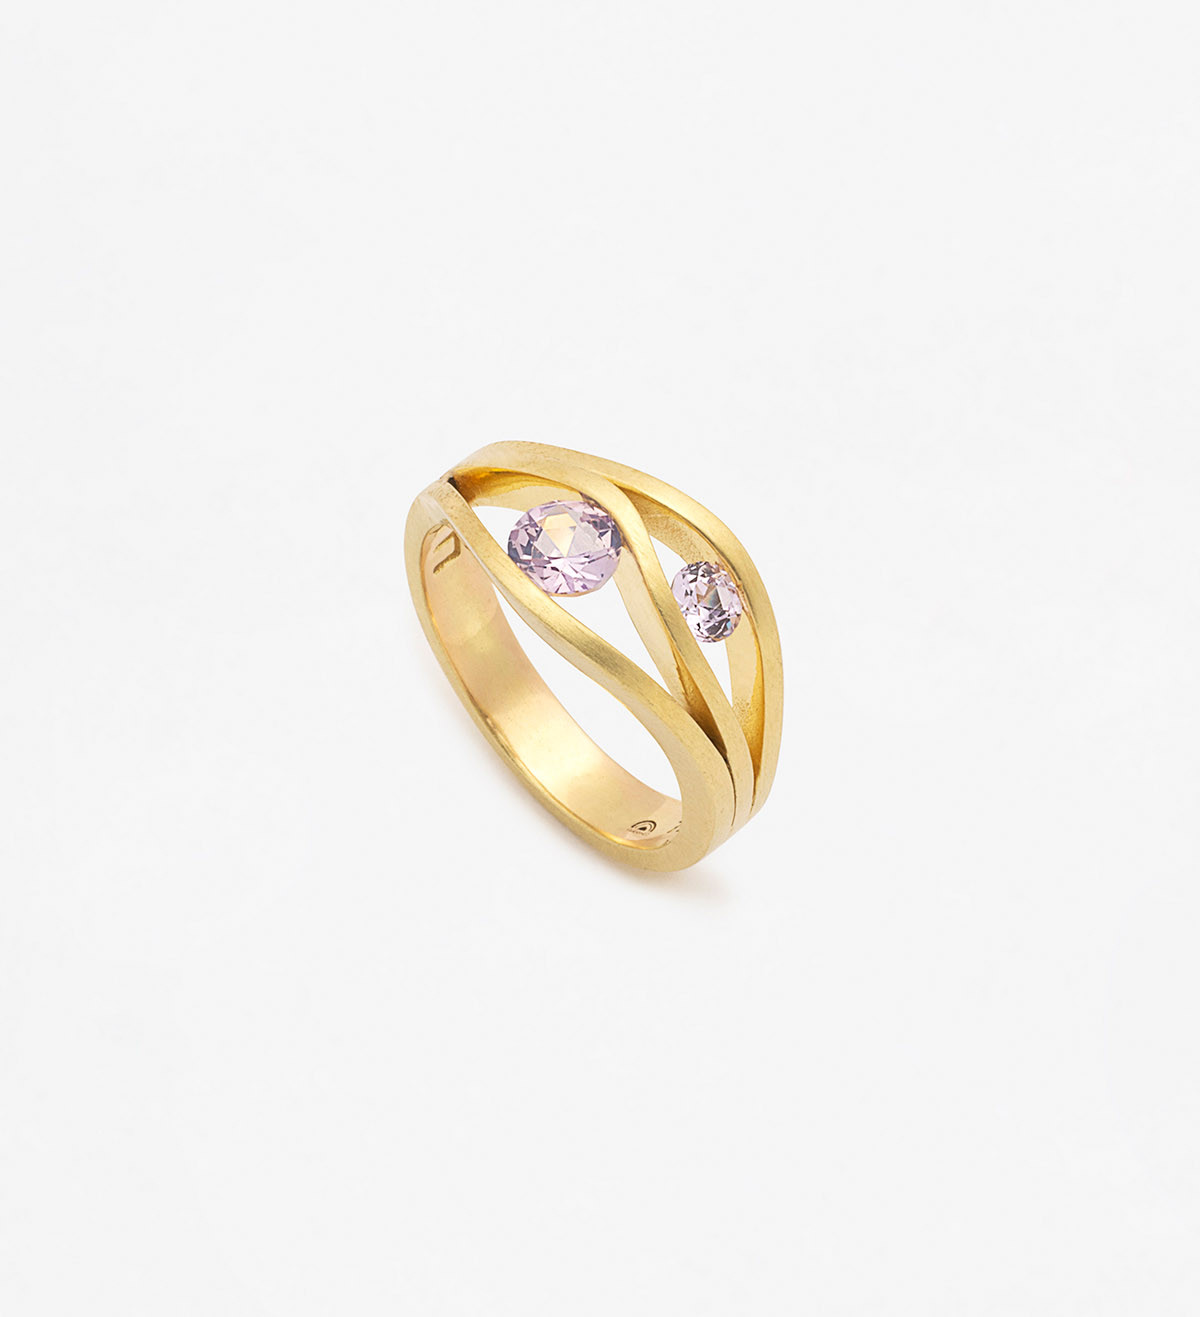 18k gold ring with pink Wennick-Lefèvre sapphires 0,61ct